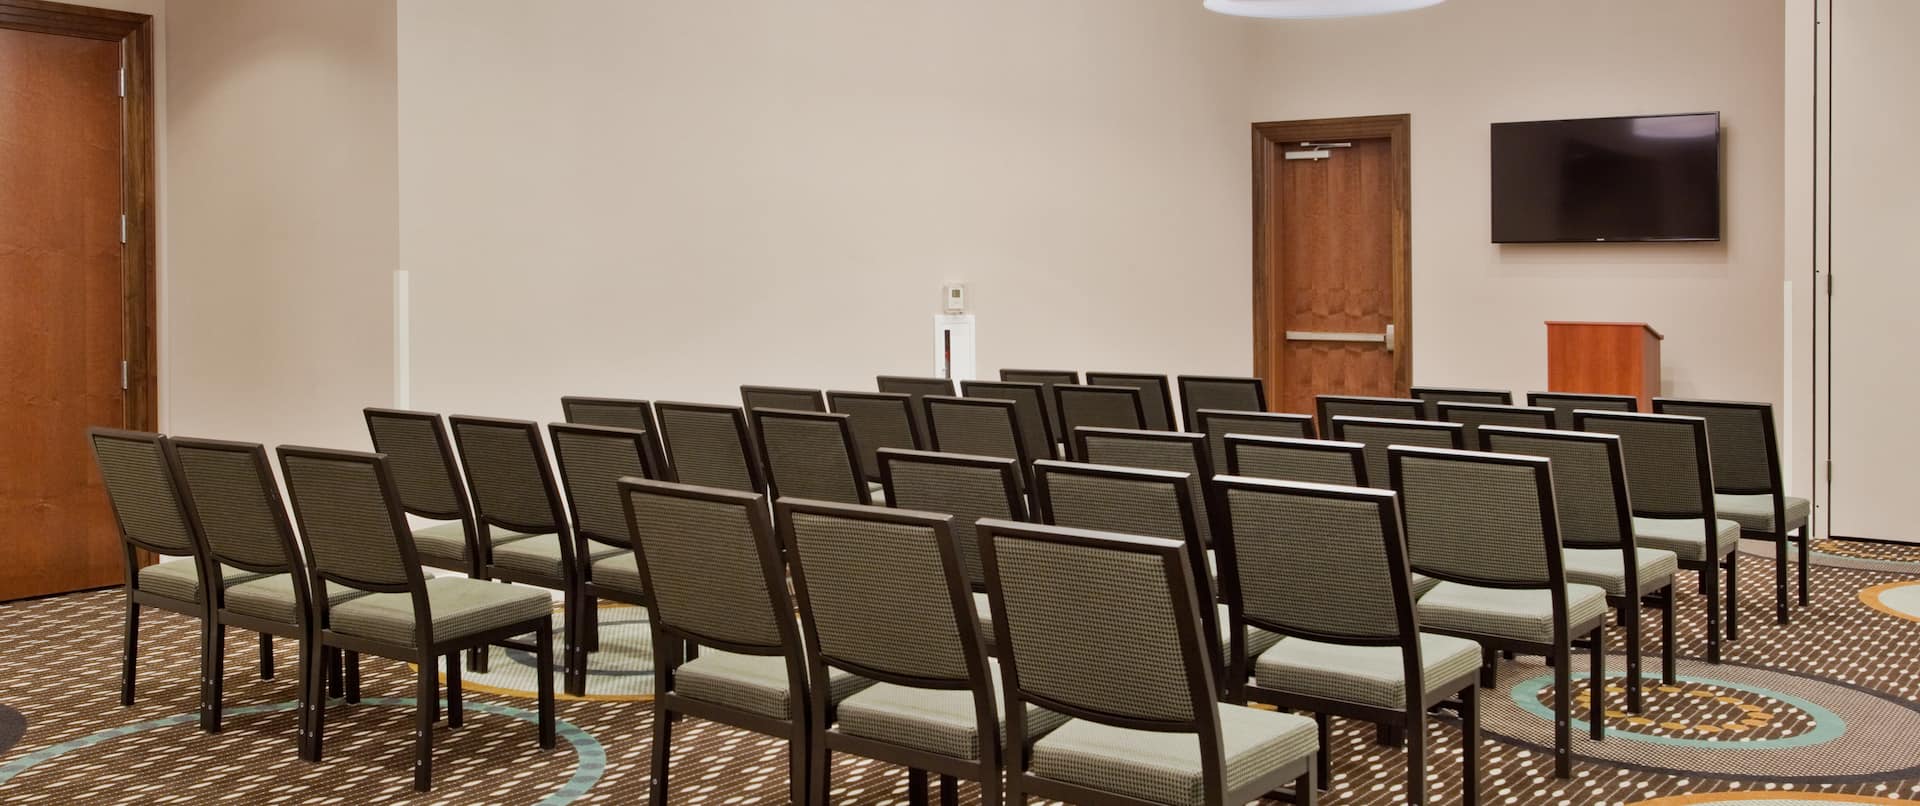 The Williams Room Meeting Space